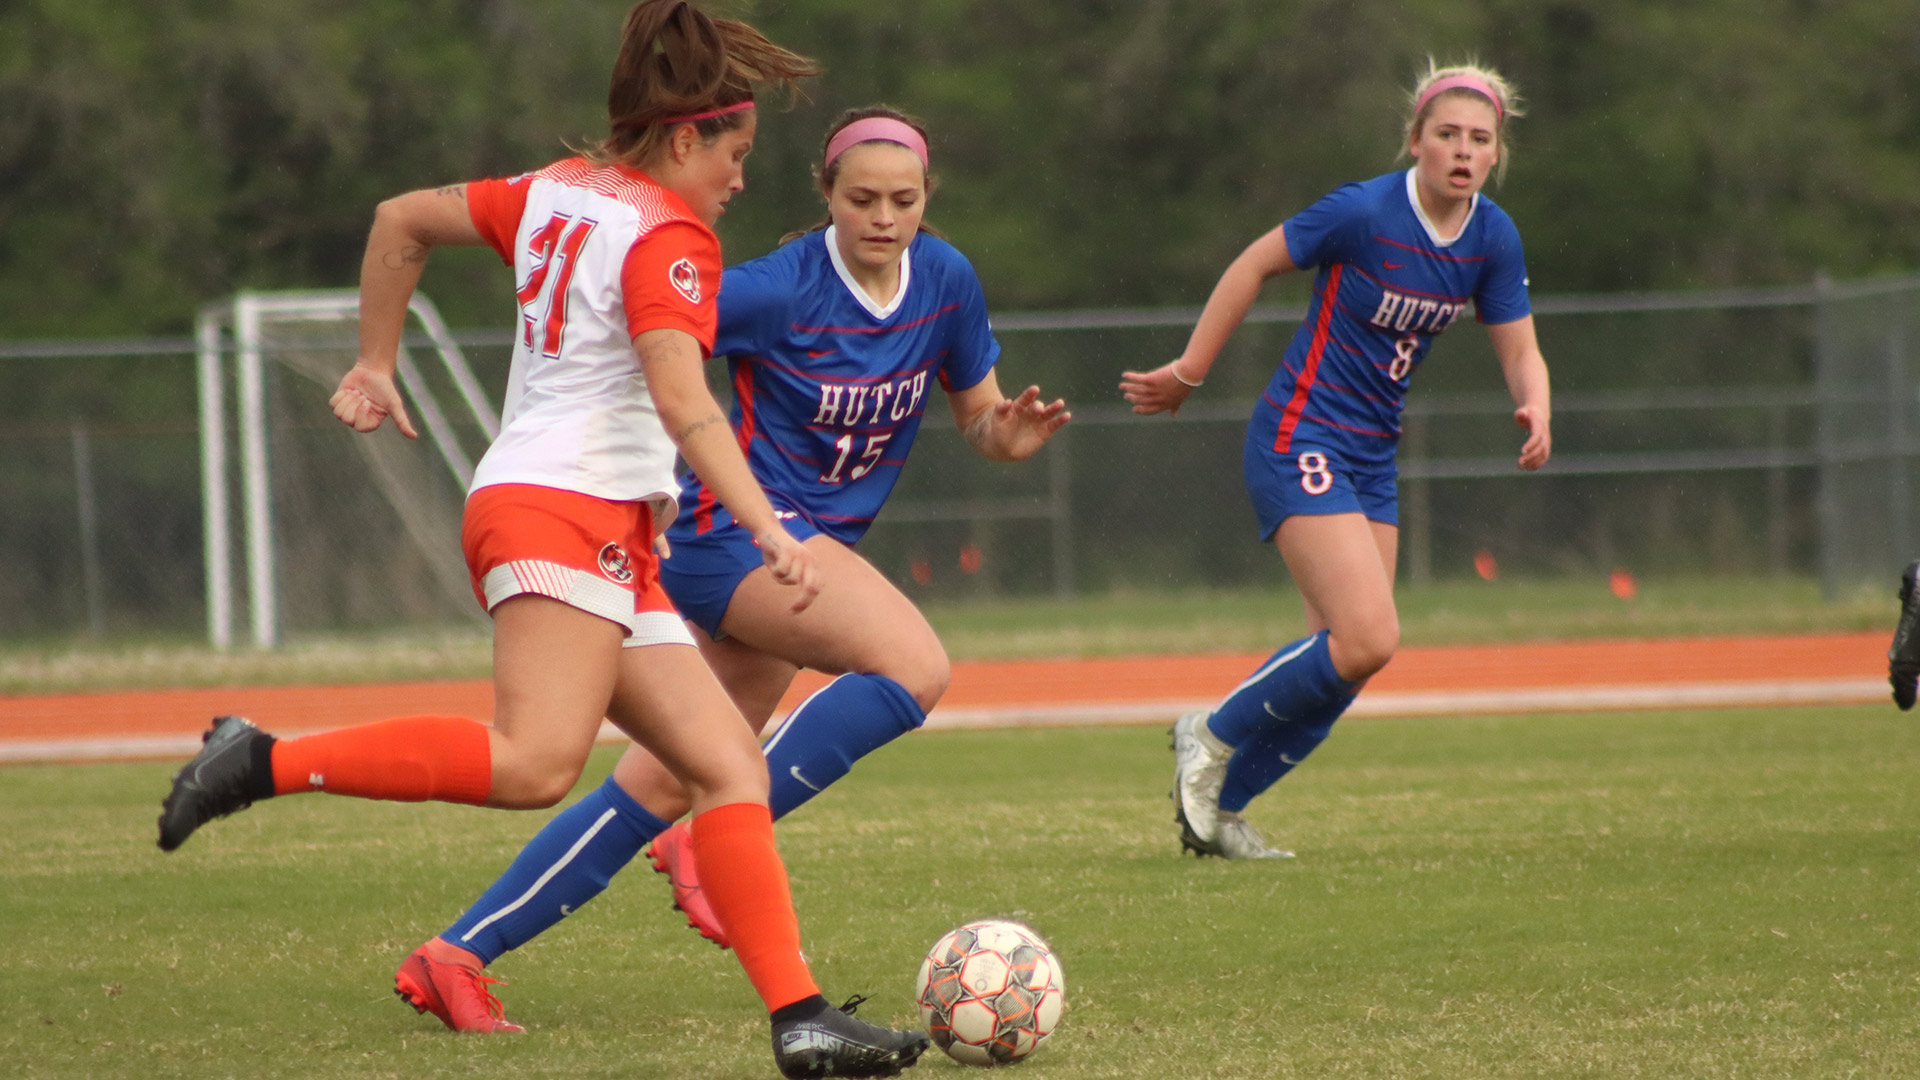 Lady Tiger soccer team battles to 1-1 tie with Hutchinson